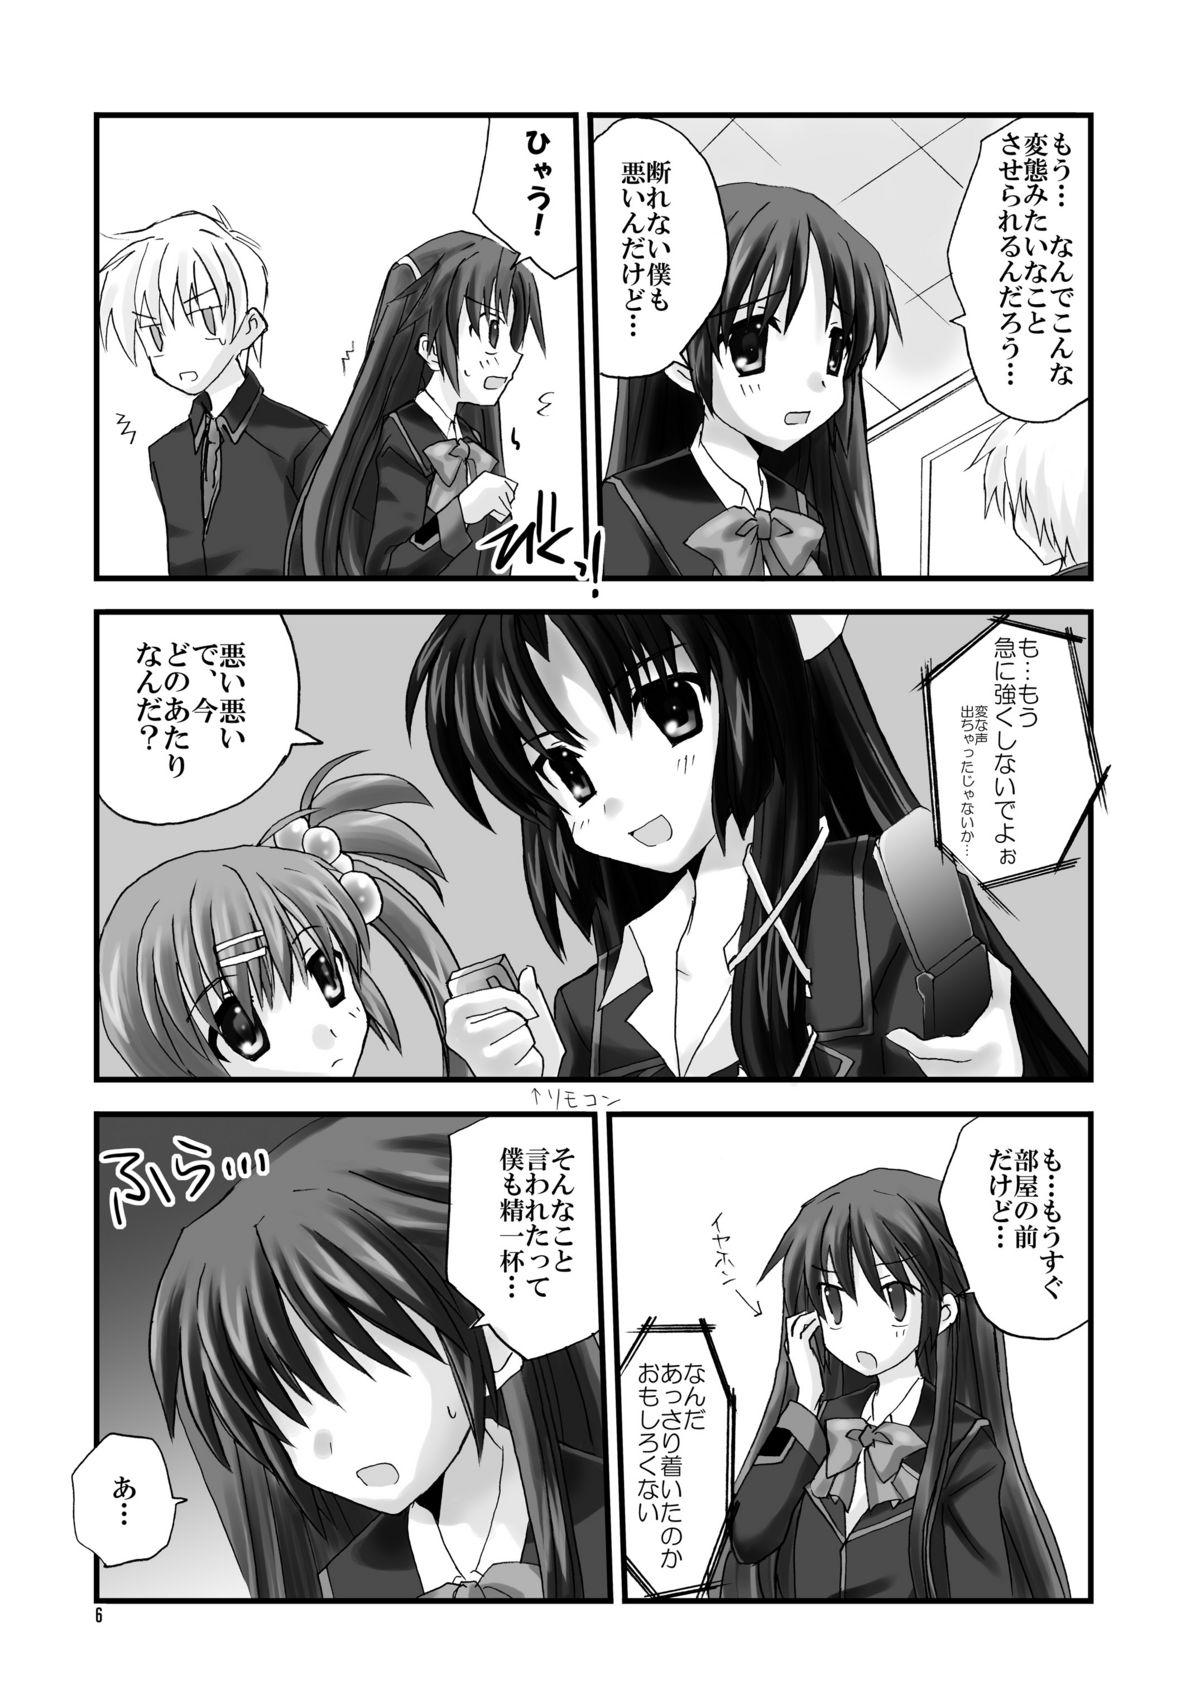 Adult Naoe de Asobo - Little busters Hardcore Porn Free - Page 6